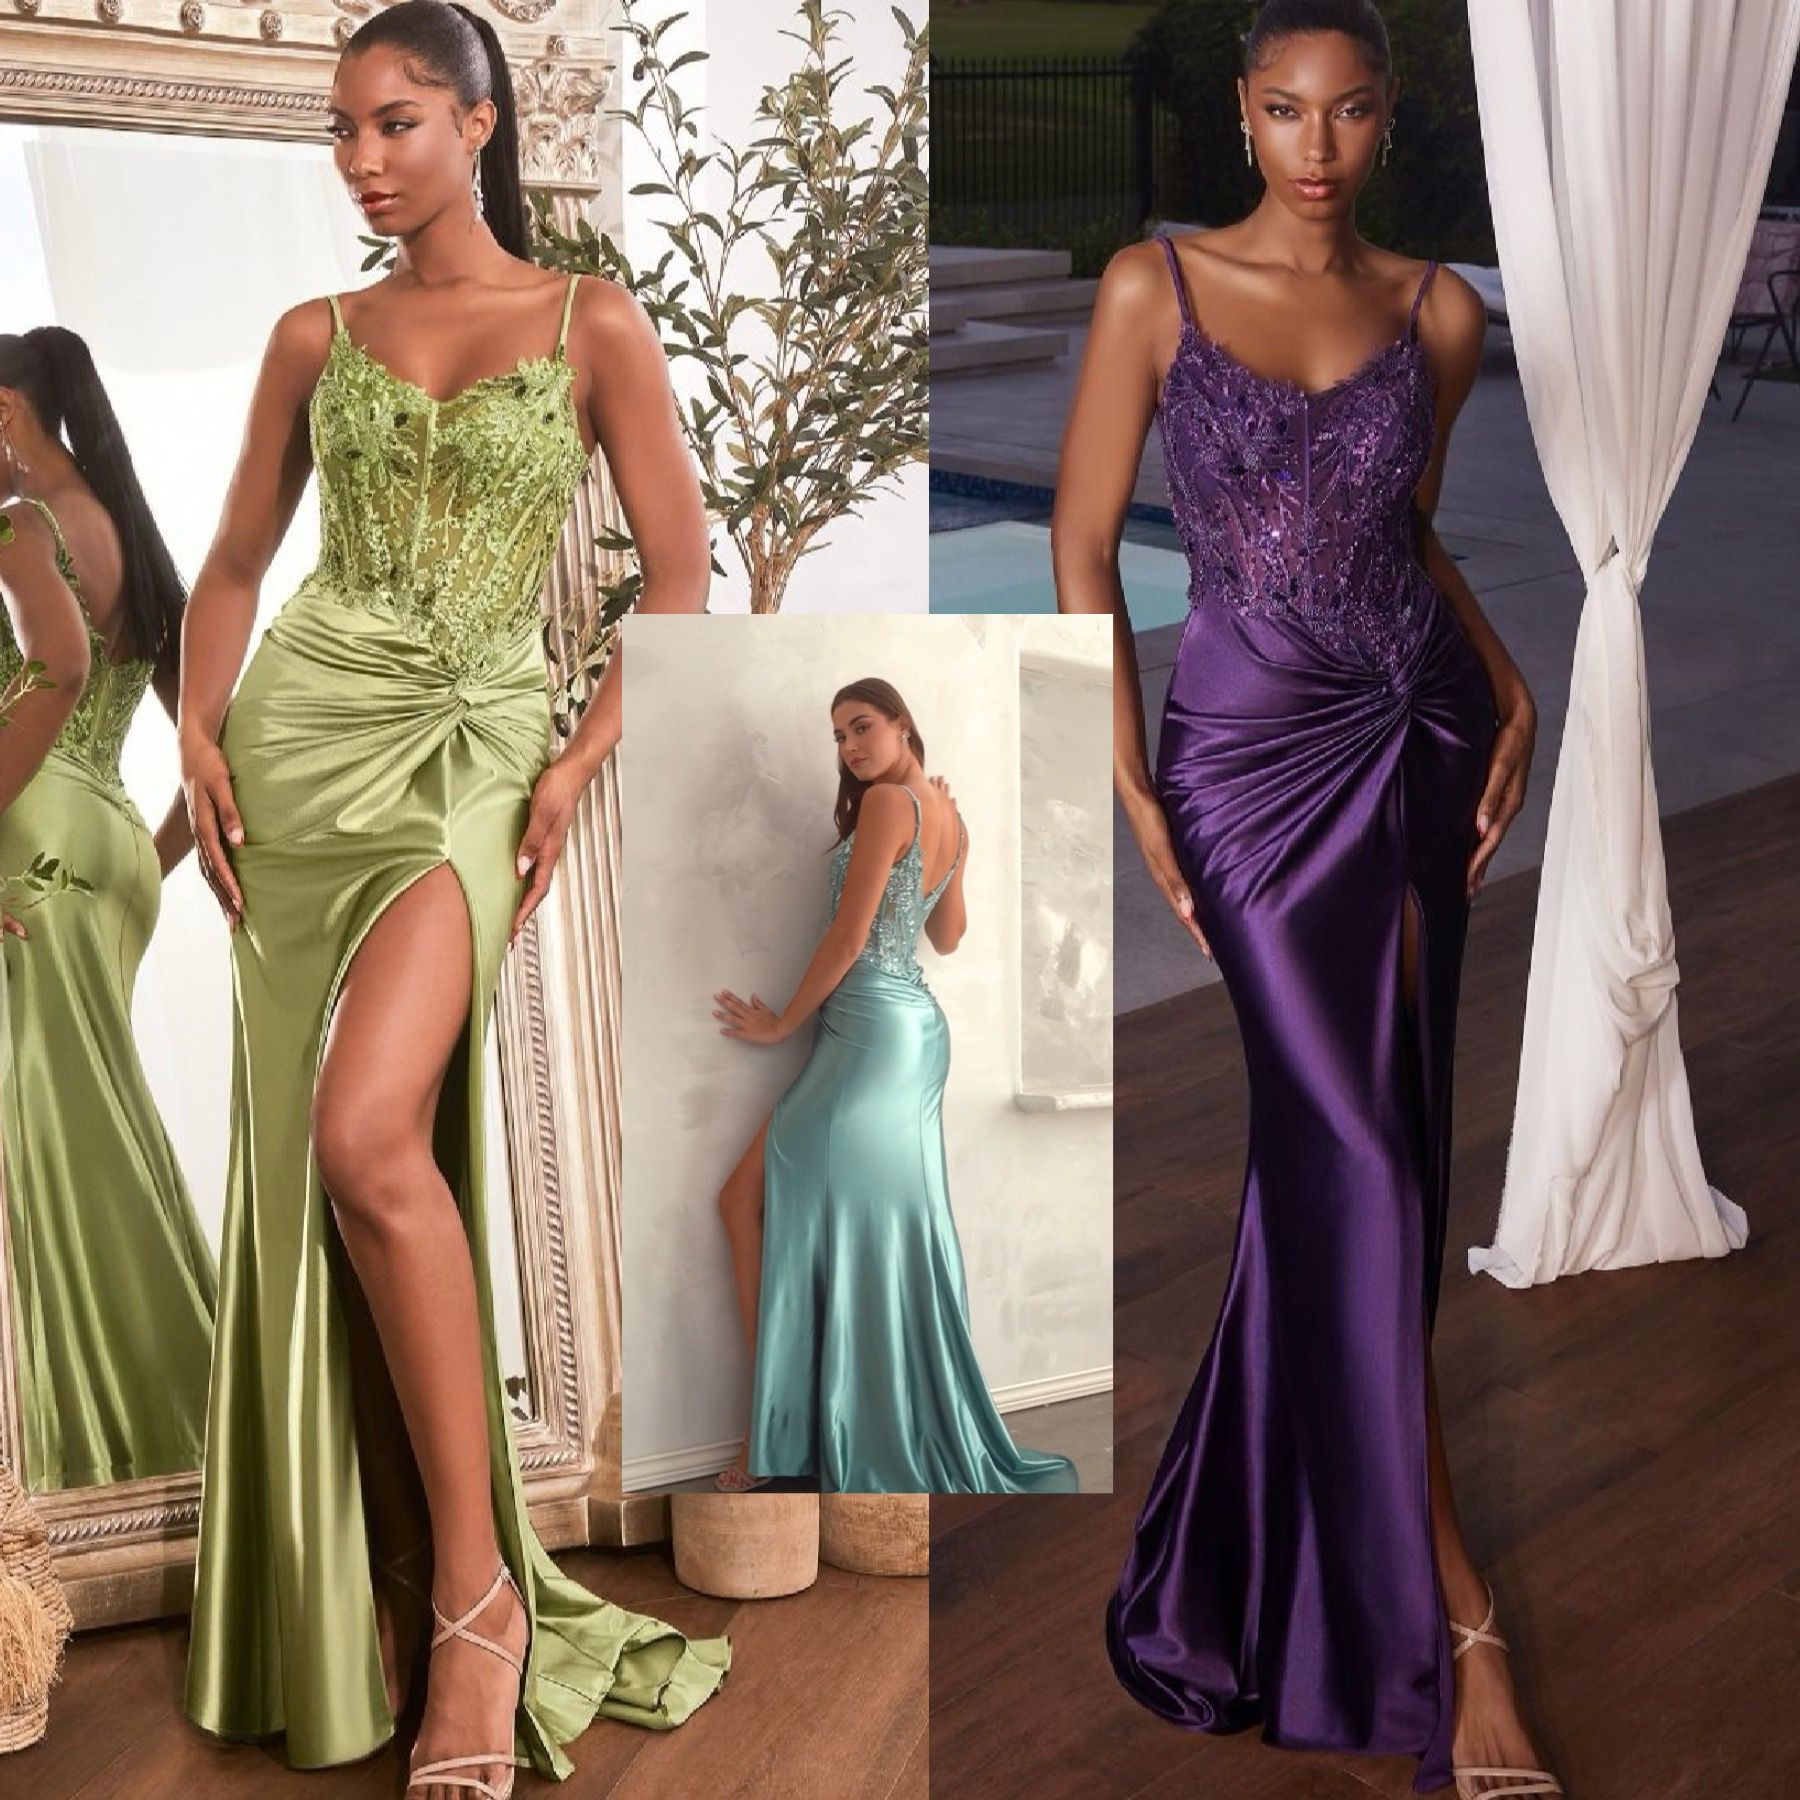 New With Tags Fitted Satin Embellished Bodice Long Formal Dress & Prom Dress $199